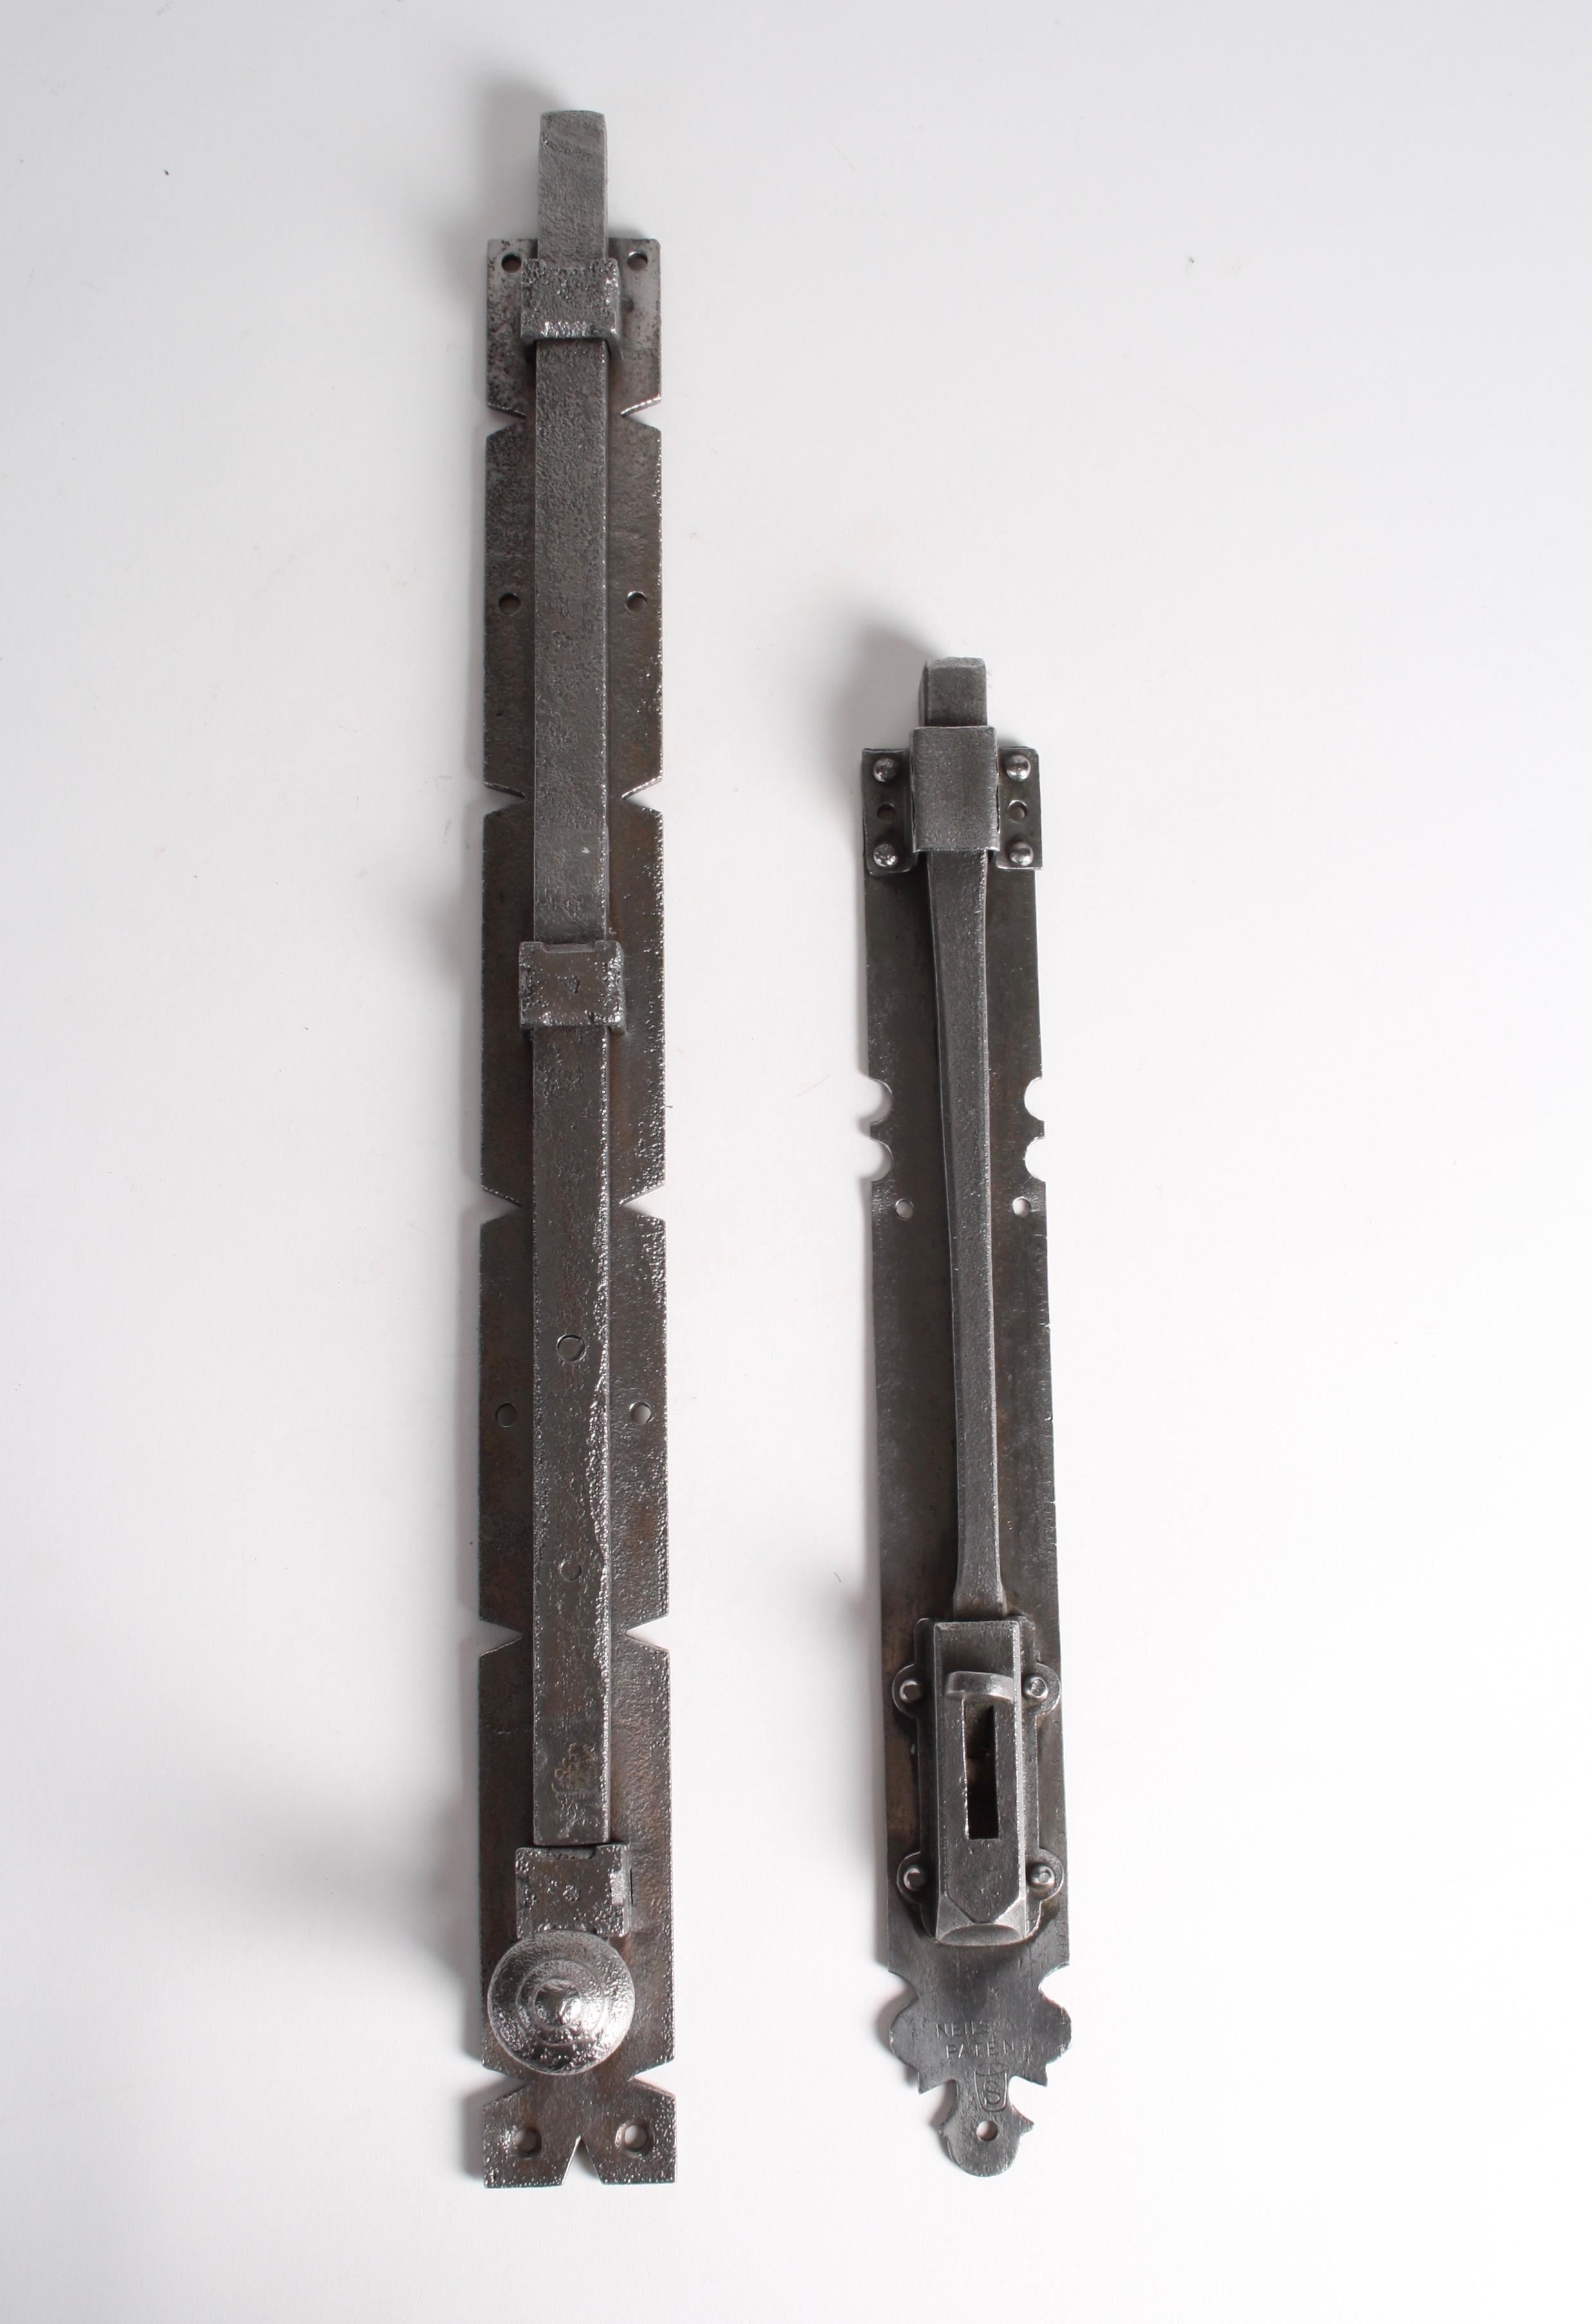 Two oversized steel surface mounted door bolts, one marked Nielson Patent.

Measures: 16 inch and 22 1/2 inch.